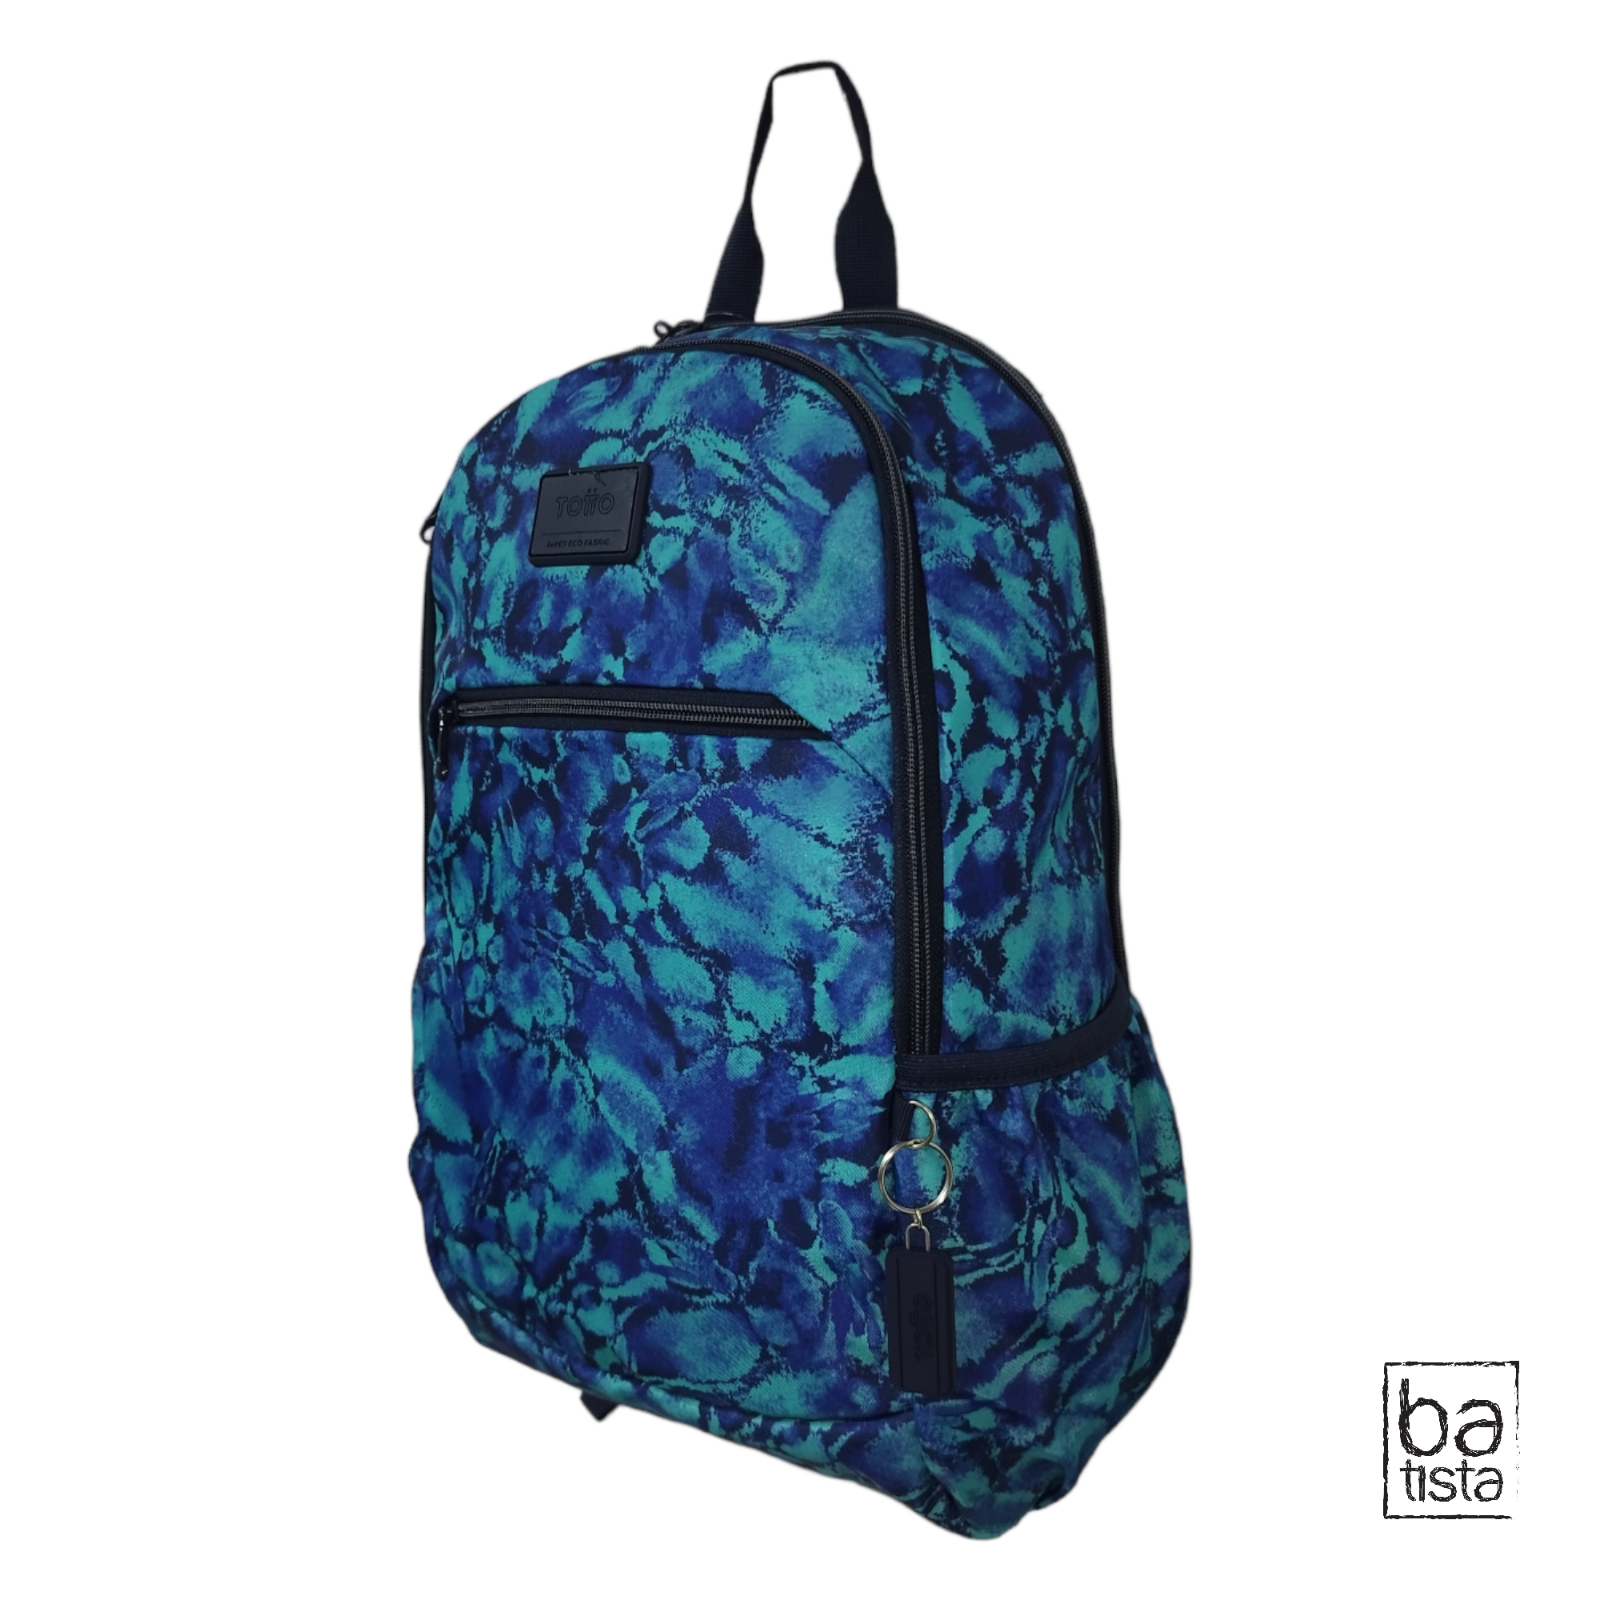 Morral Totto Tracer 2 5J8 18.08 Lts